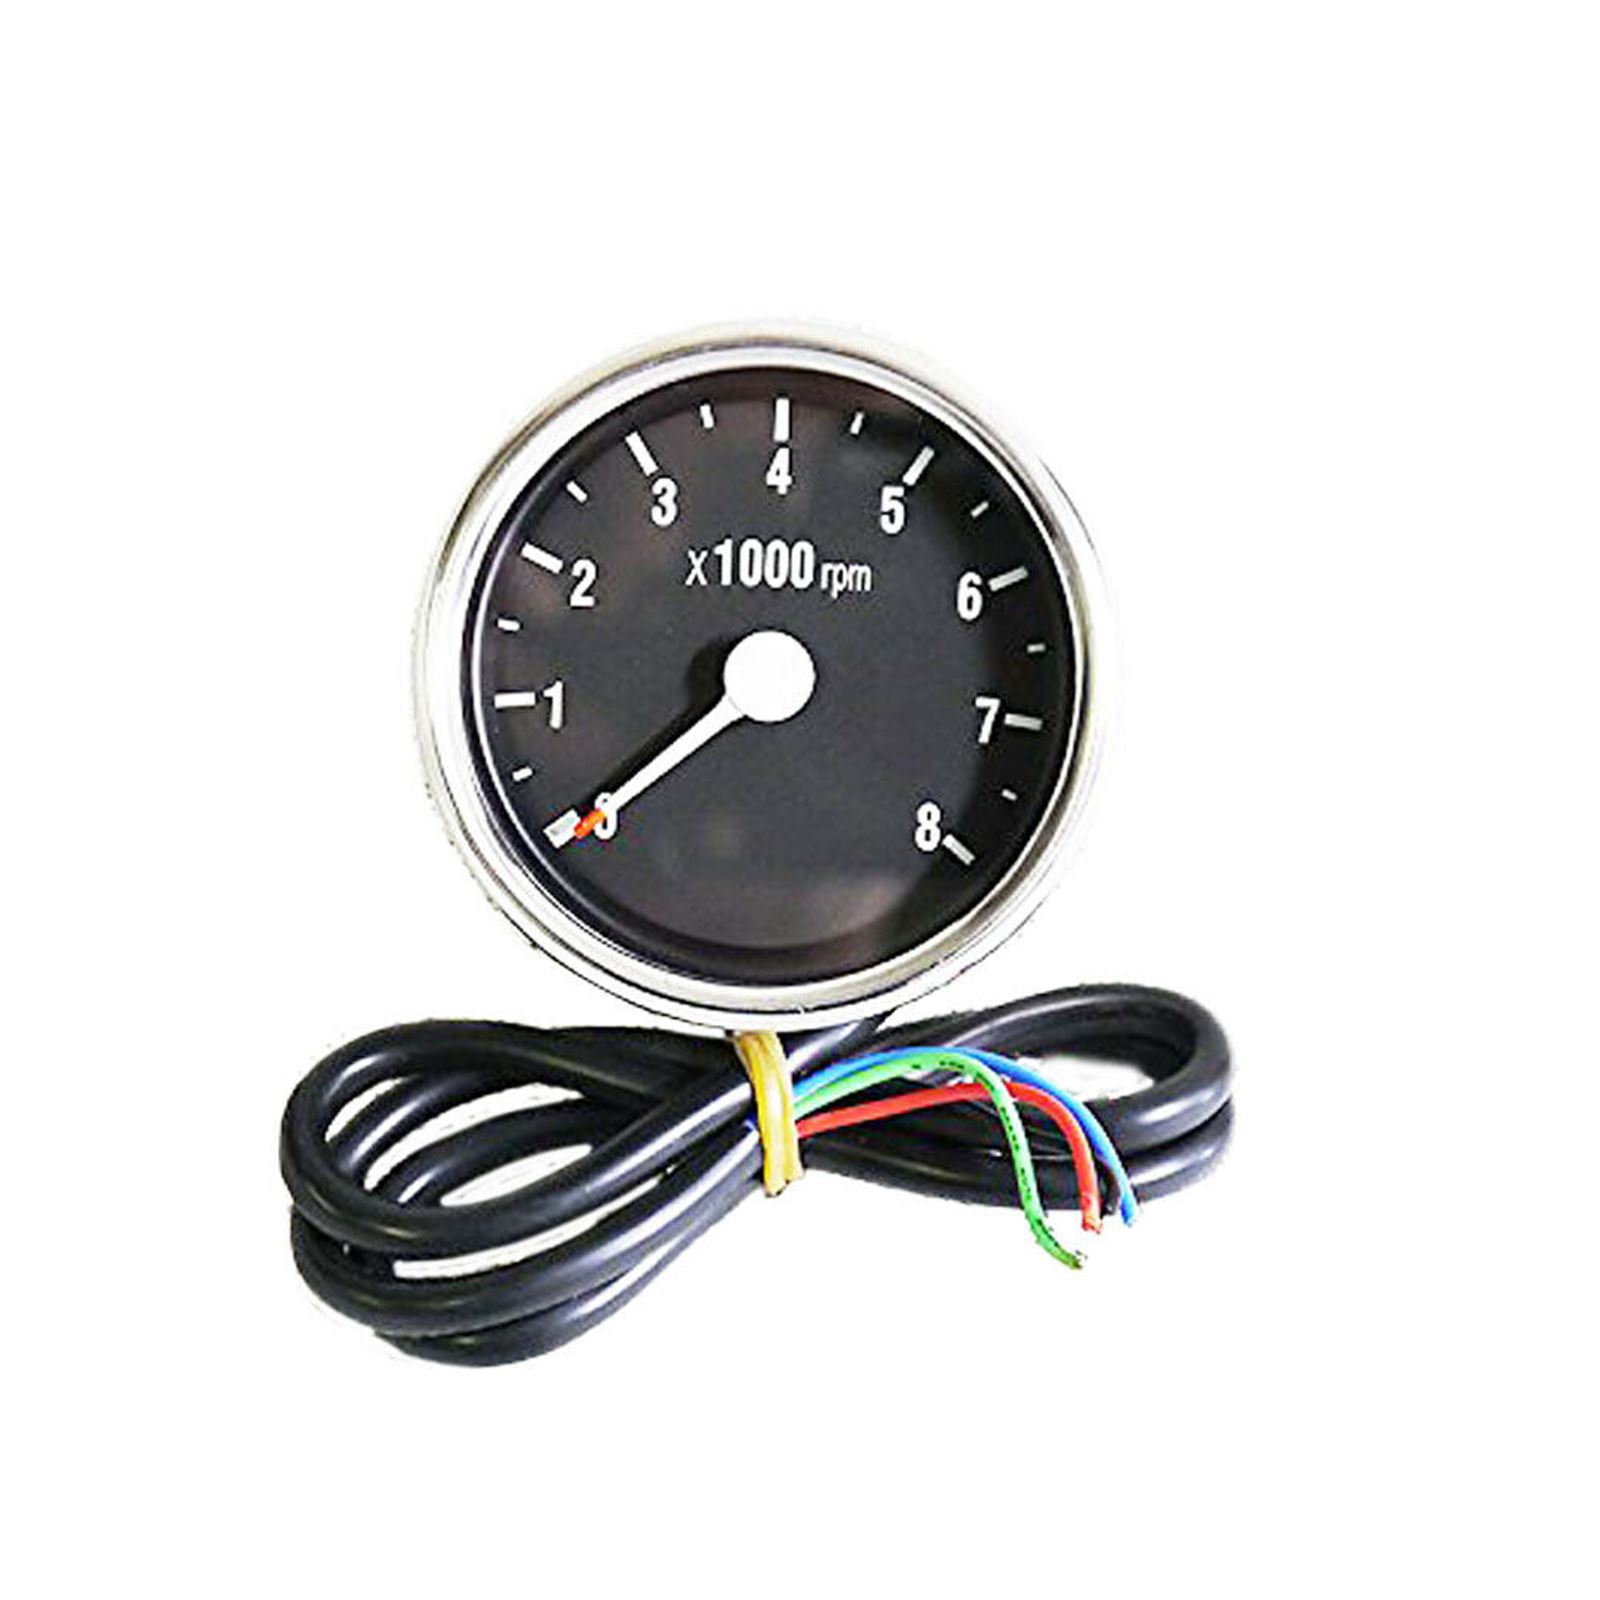 Motorcycle Electronic 2 Cylinder Twin 4 Stroke 8K RPM BMW Tach Tachometer Gauge 